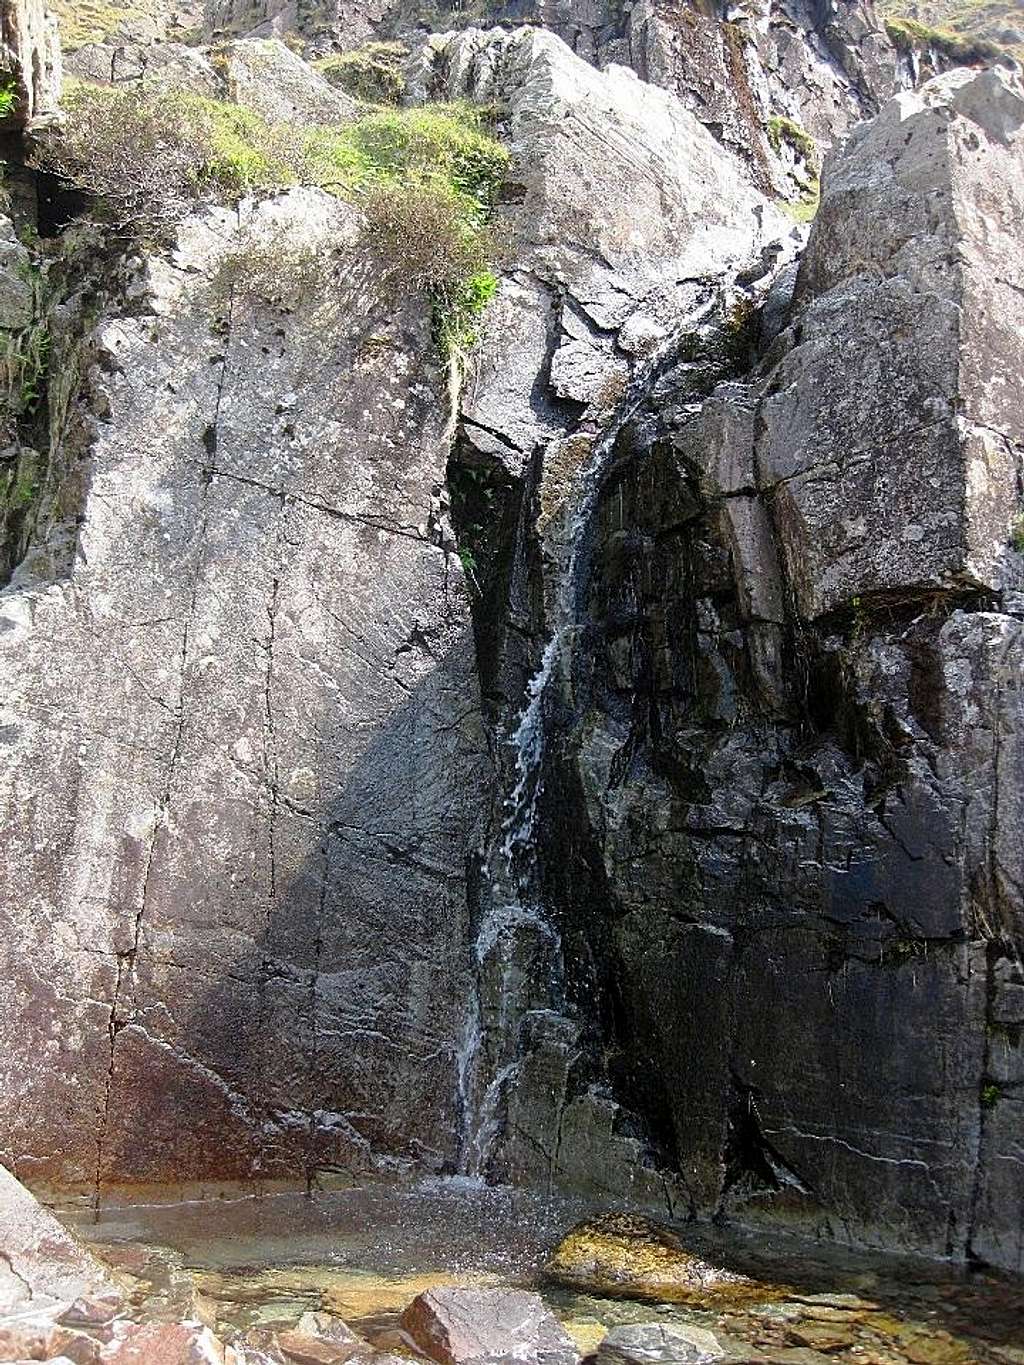 A sudden obstacle in the Grains Gill